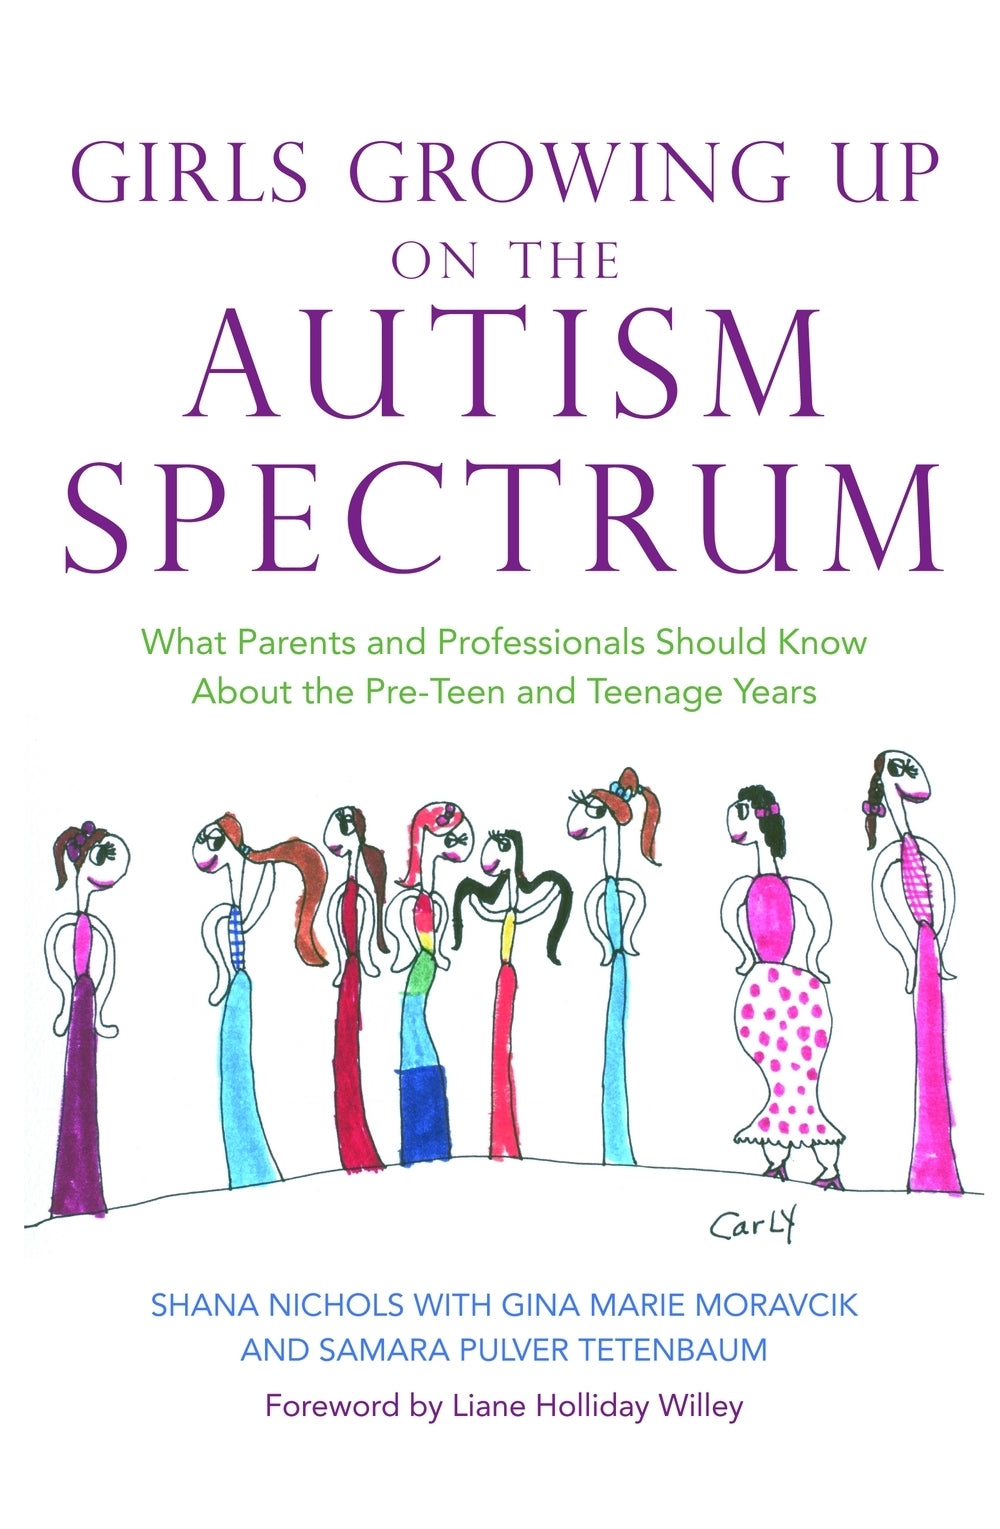 Girls Growing Up on the Autism Spectrum by Shana Nichols, Liane Holliday Willey